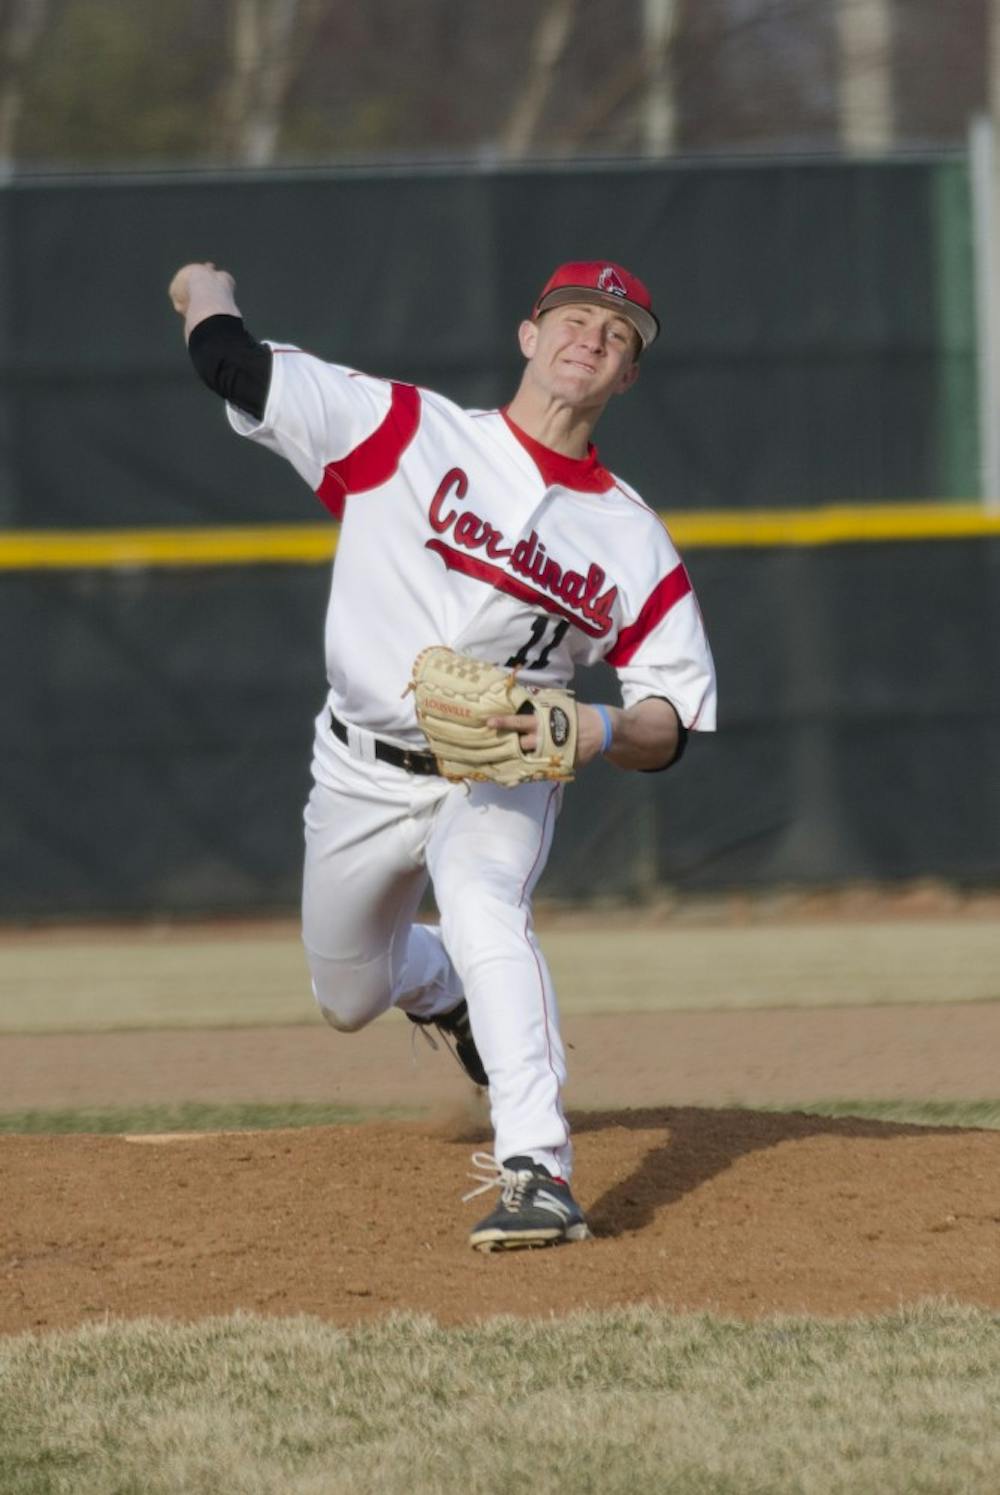 <p><strong>Freshman pitcher Zach Plesac </strong>throws a pitch against Bowling Green on March 21 at Ball Diamond. Plesac has received two MAC Pitcher of the Week awards this season. <strong>DN FILE PHOTO BREANNA DAUGHERTY</strong></p>